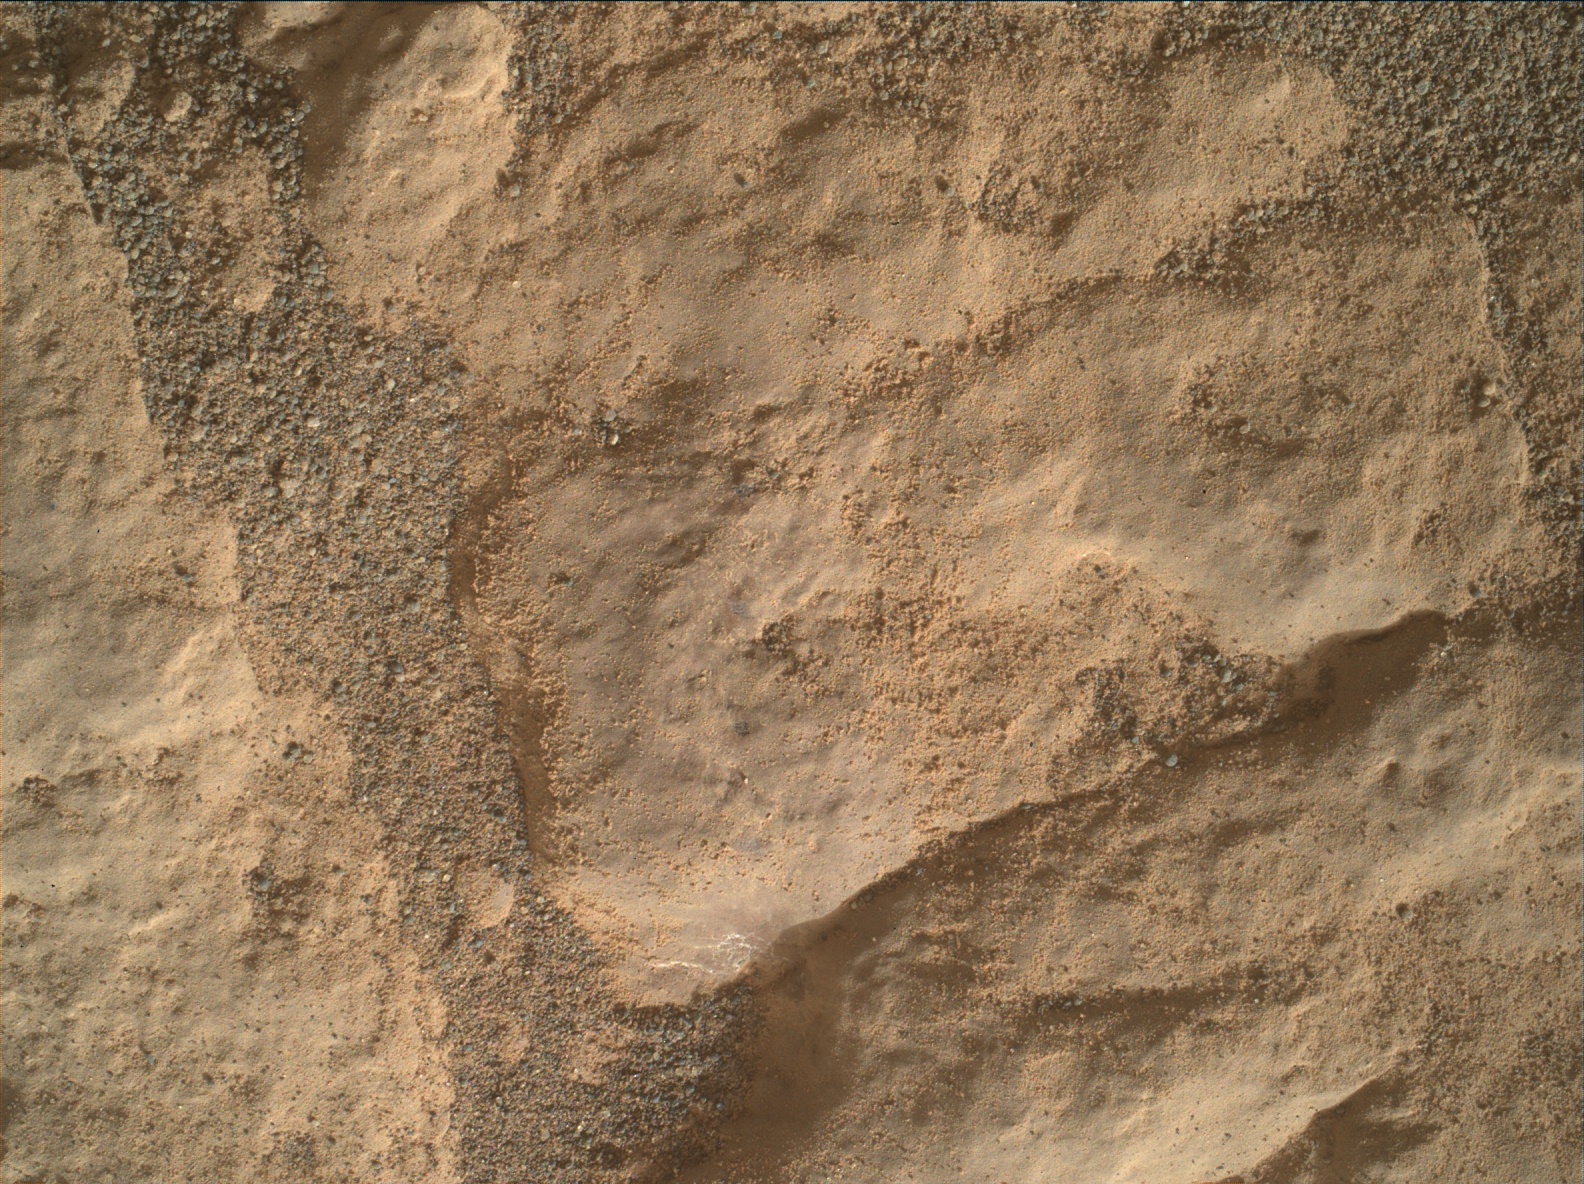 Nasa's Mars rover Curiosity acquired this image using its Mars Hand Lens Imager (MAHLI) on Sol 2475